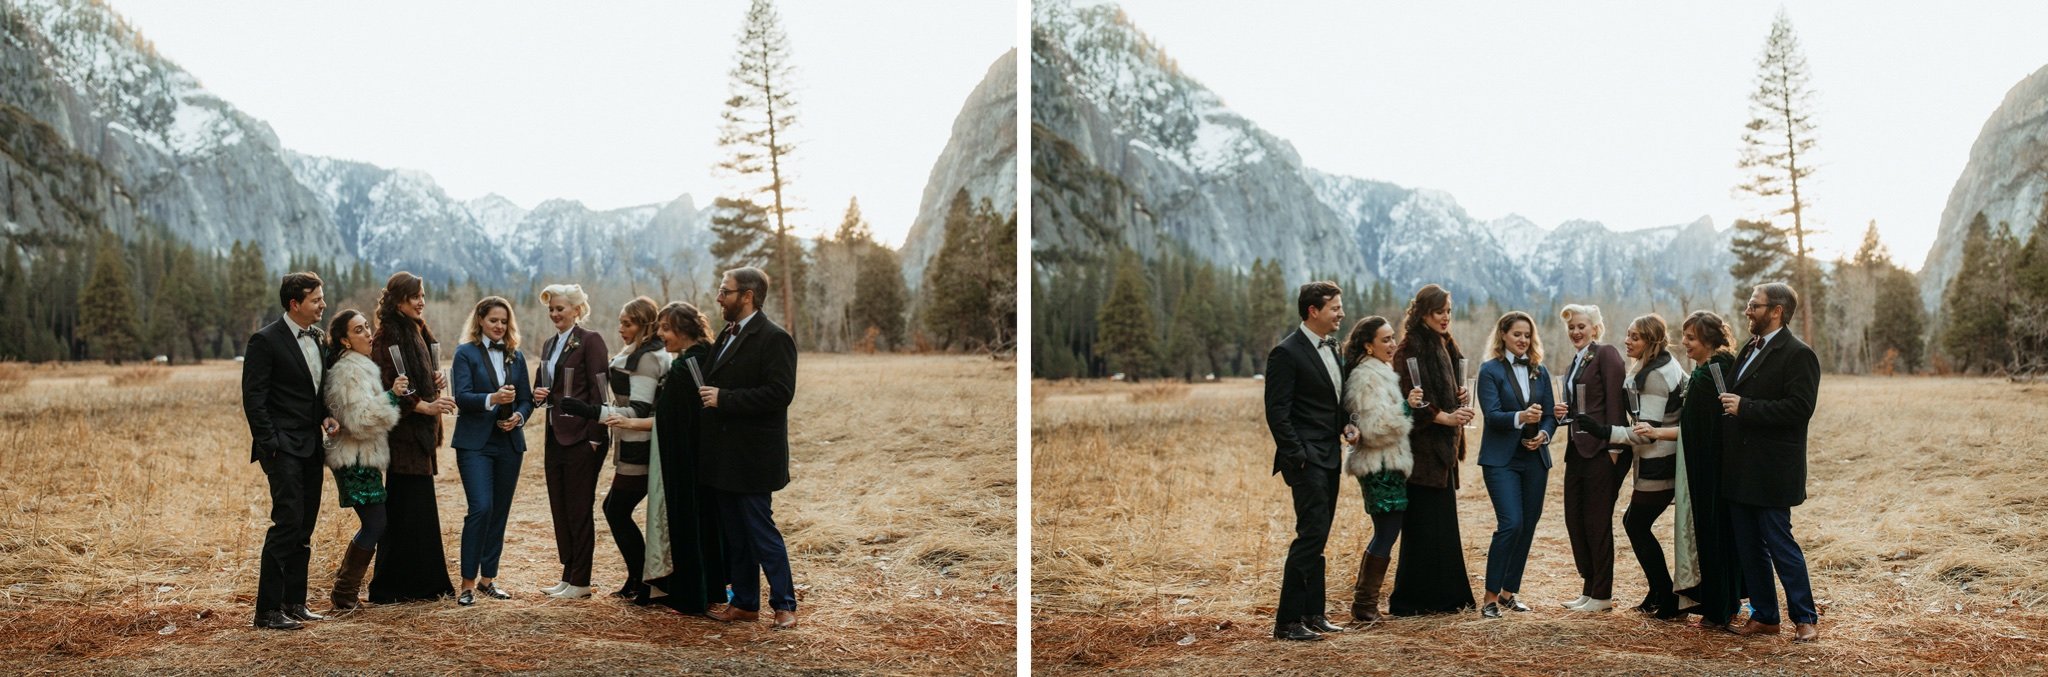 LGBT-Yosemite-National-Park-Elopement-with-Two-Brides-Will-Khoury-Elopement-Photographer_52.jpg